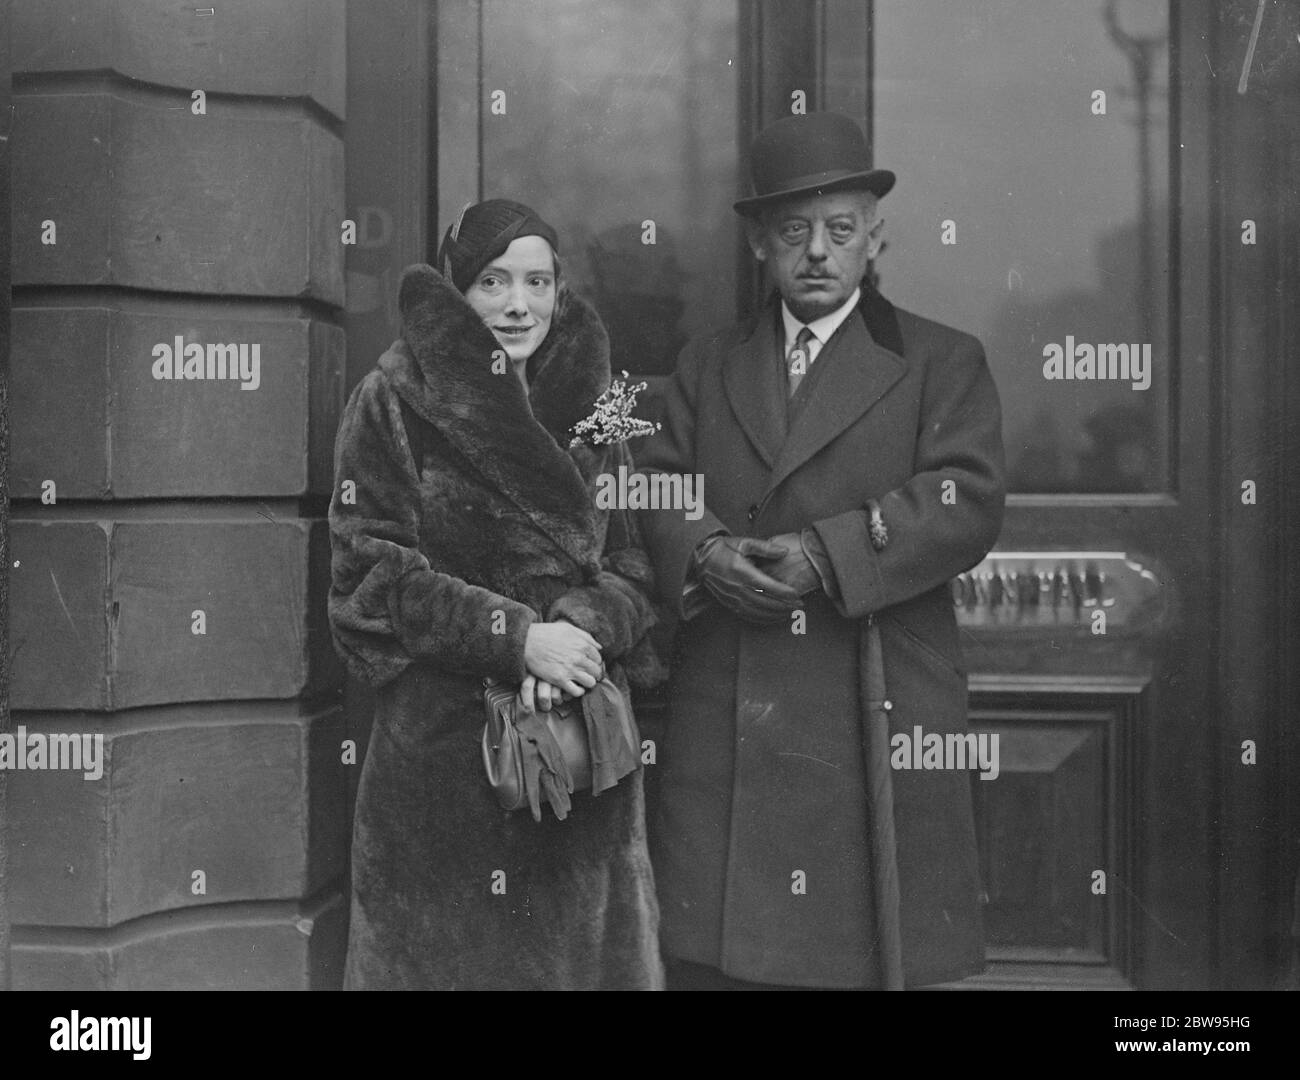 London art collector marries ballet dancer at St Pancras register office . The marriage of Mr Henry Hirsch the well known London art collector and member of the Stock exchange , to Miss Helen Mary Sykes , daughter of the late Mr Charles Craven Sykes a Huddersfield Woollen Mills owner , and a former member of Pavlova ' s Russian ballet company , took place at St Pancras Register Office , London , she was known on the stage as Saxova . The bride and groom leaving the St Pancras Register Office , London after the ceremony . 16 November 1932 Stock Photo